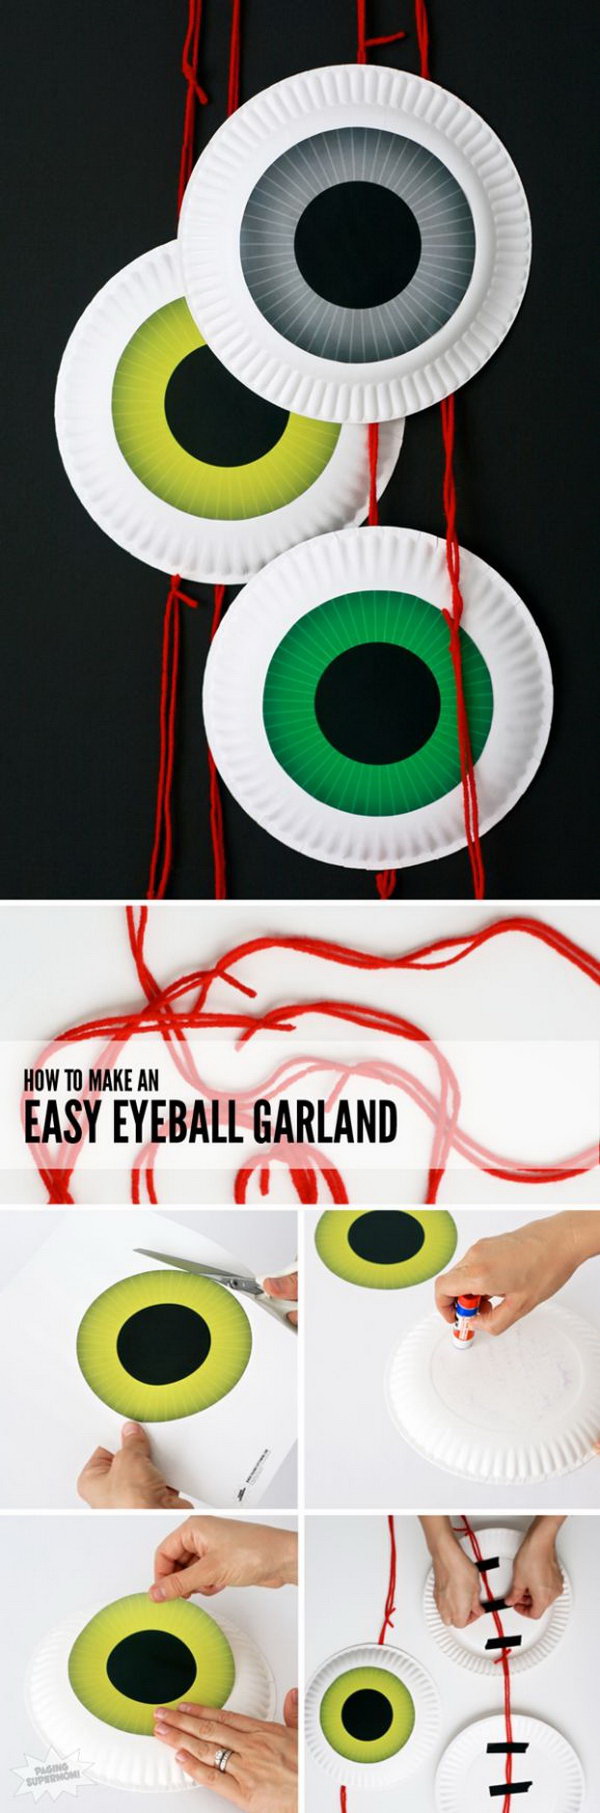 Cute DIY Halloween Eyeball Door Garland. This eyeball door garland is fun for the front door decoration during this Halloween season! Fun and incredibly easy to make with our tutorial.  